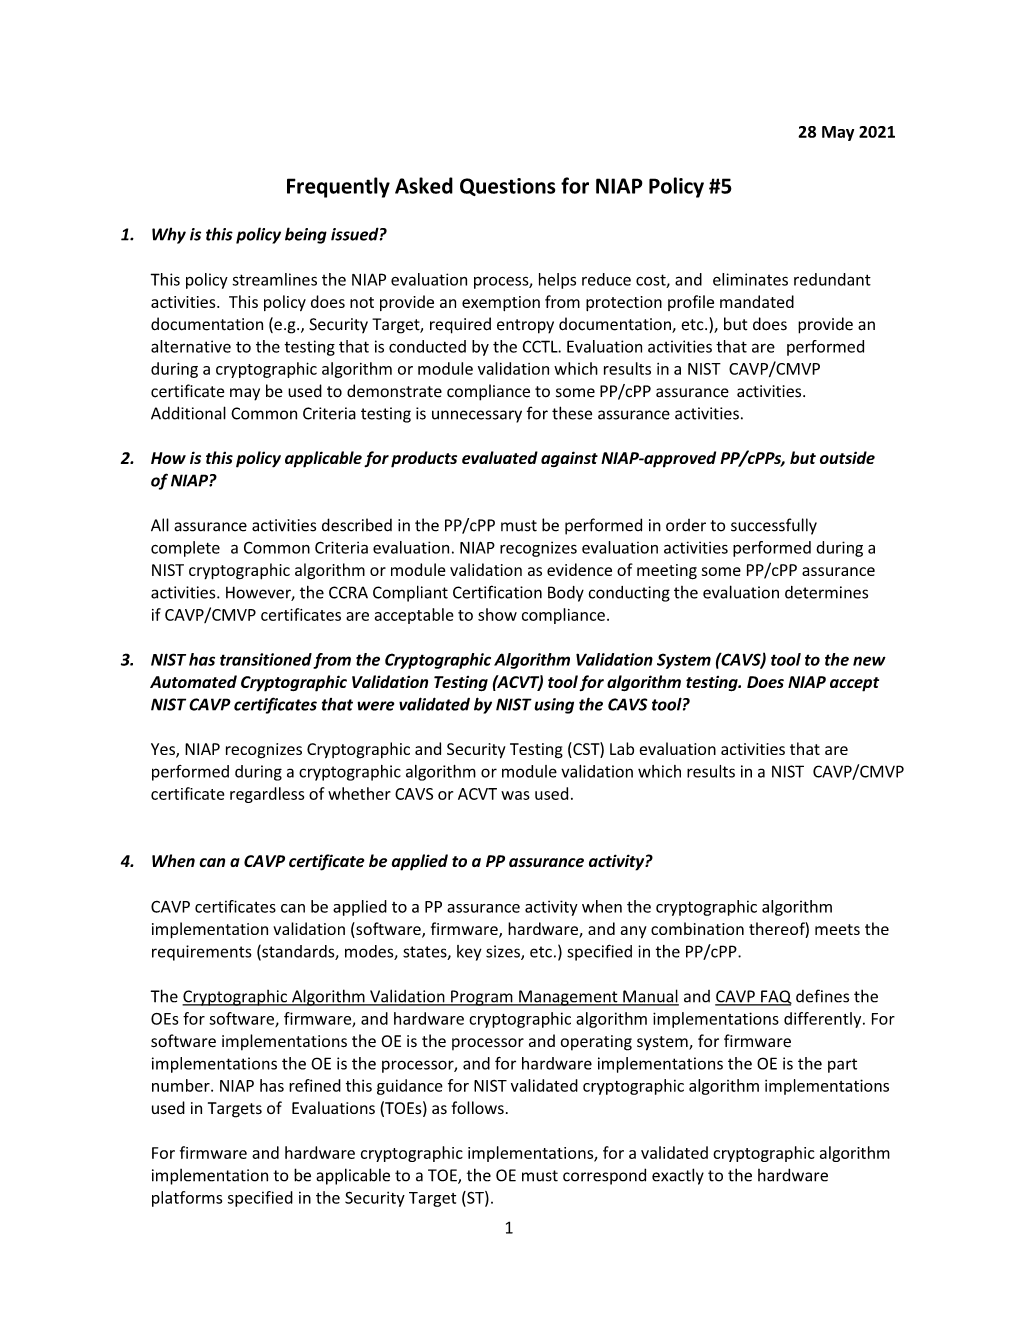 Frequently Asked Questions for NIAP Policy #5